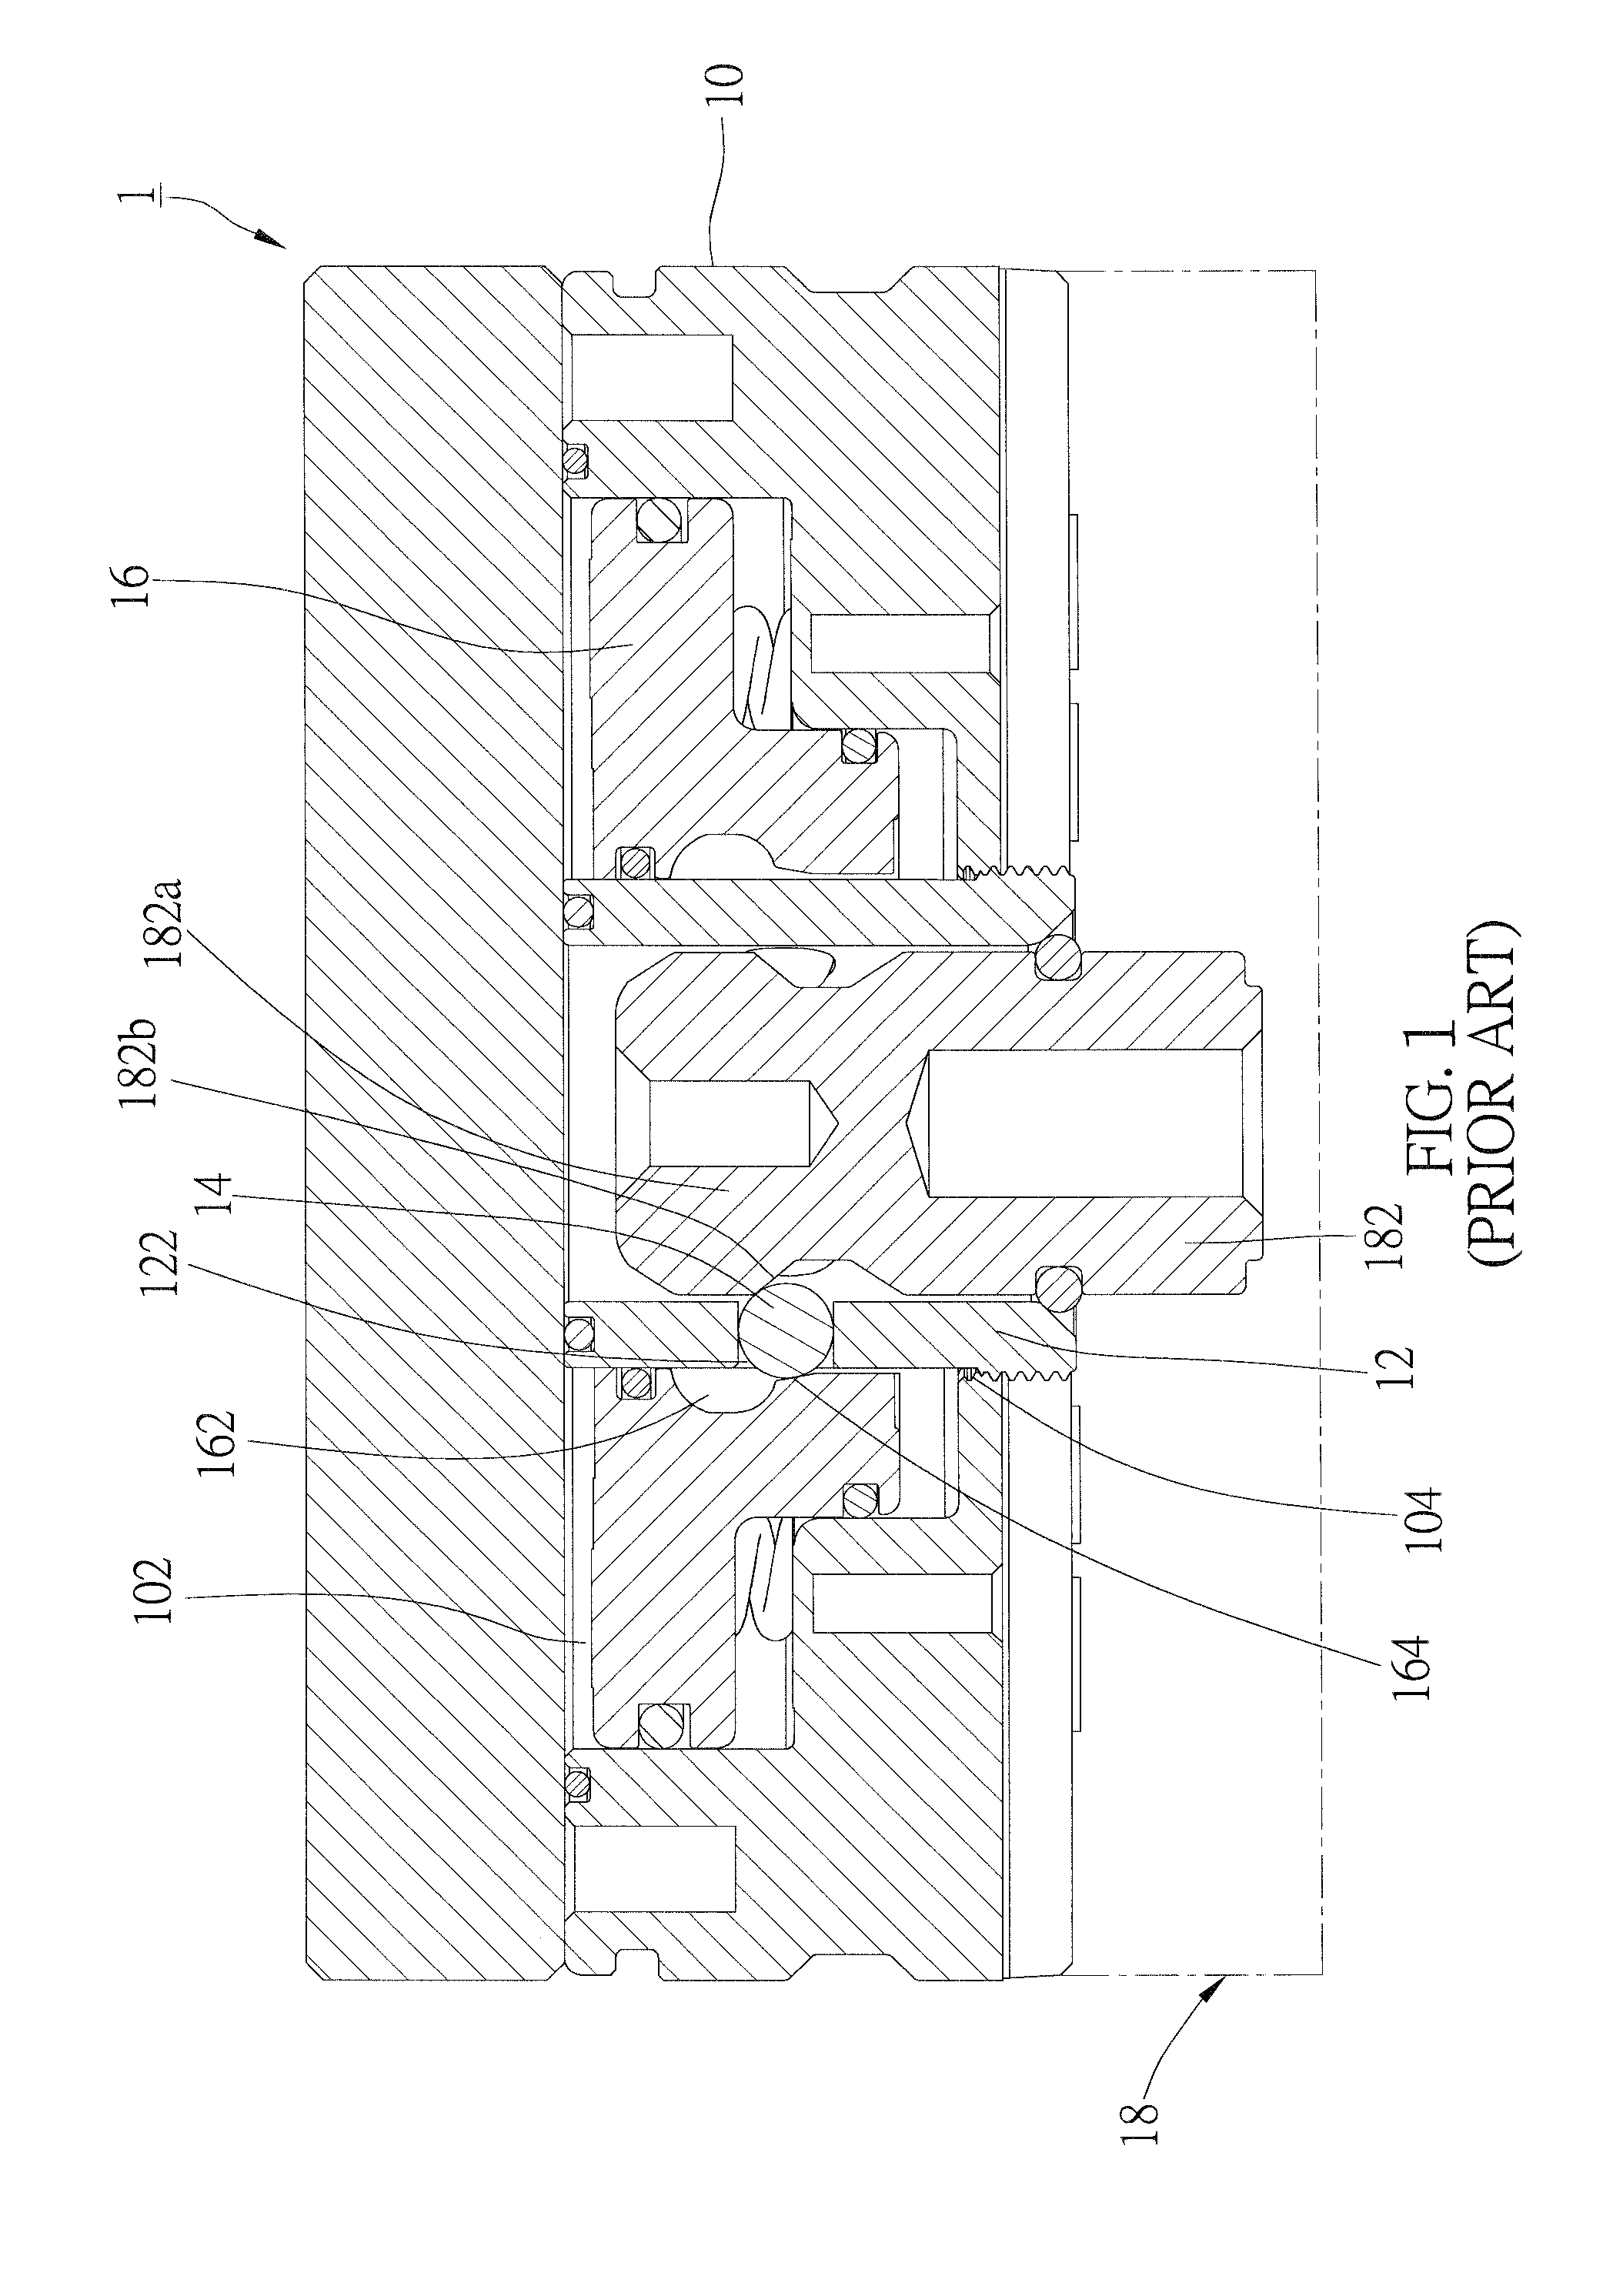 Coupling device of jig